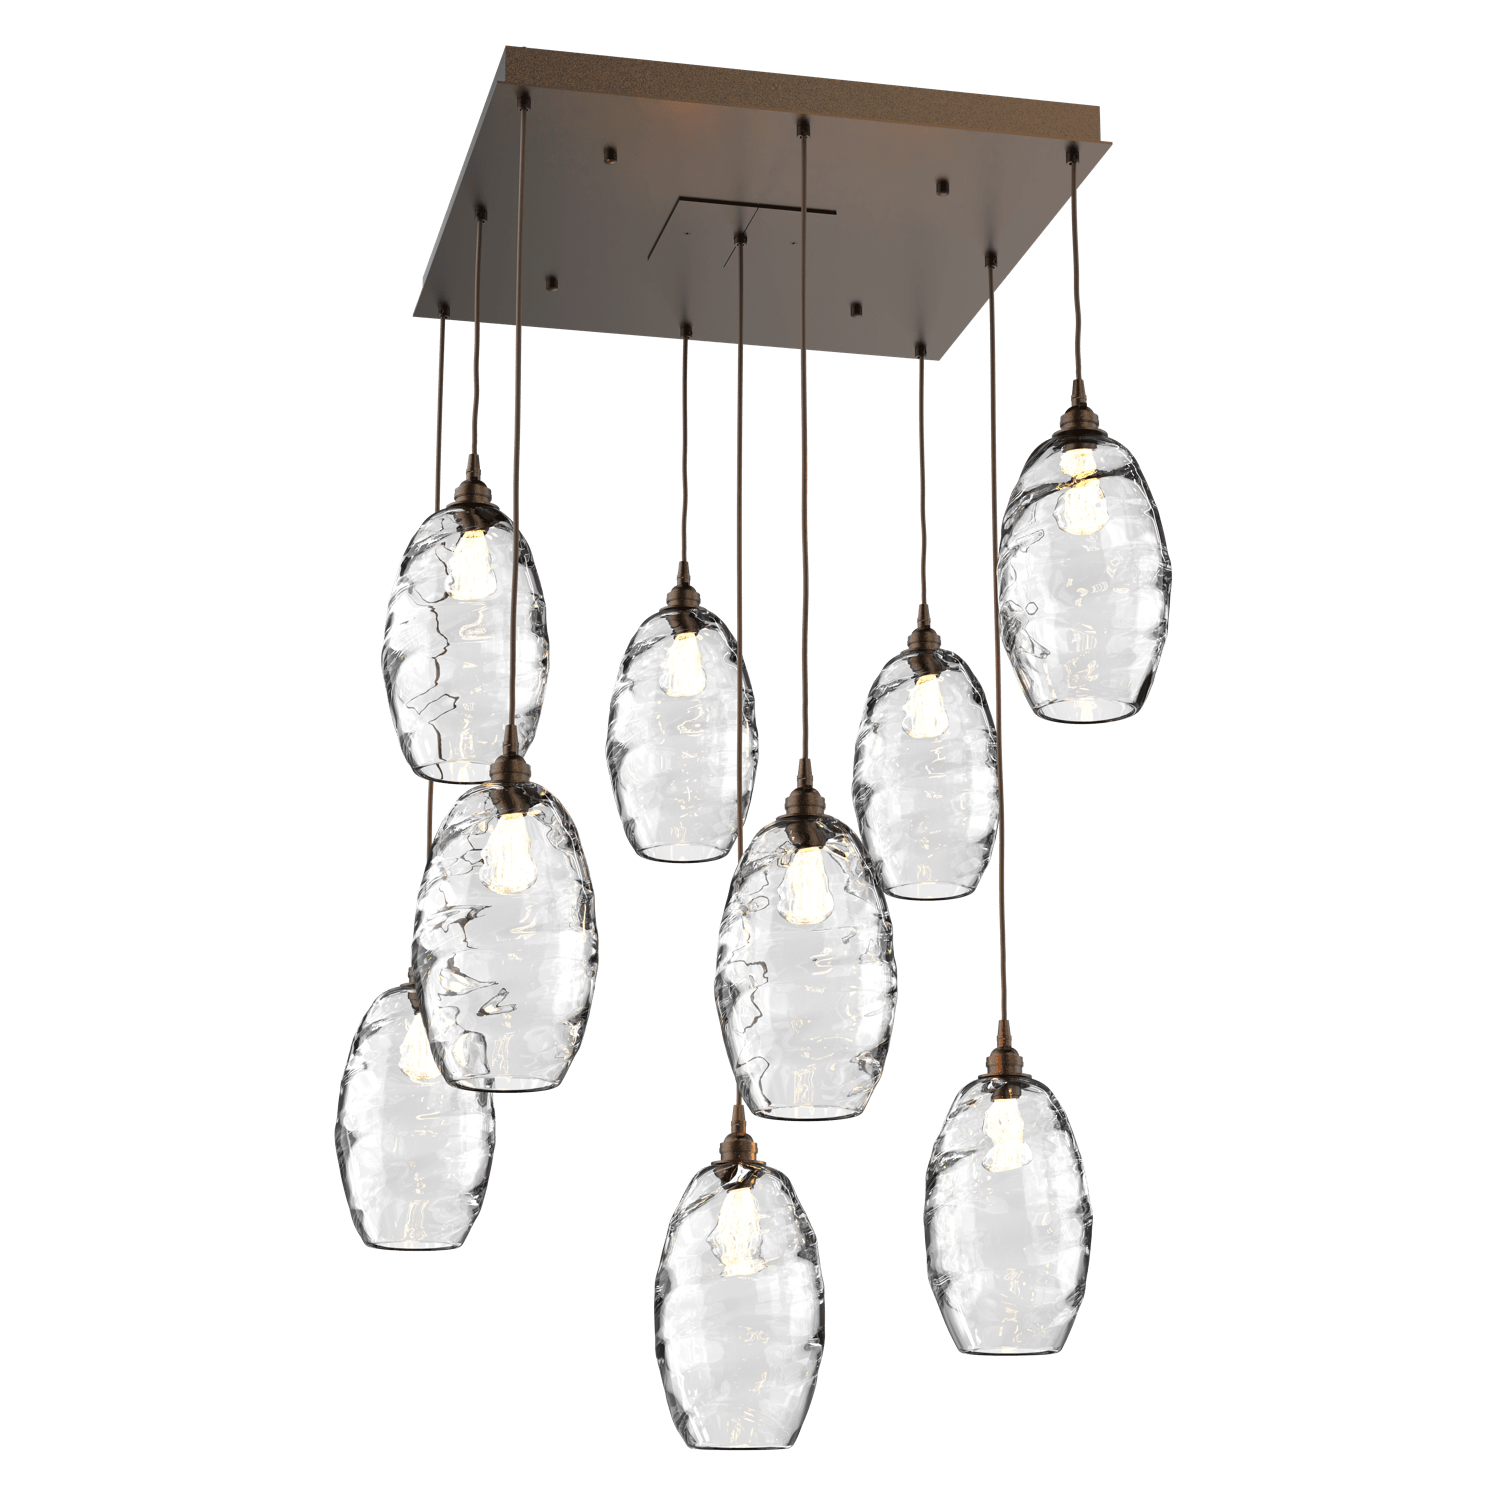 CHB0035-09-FB-OC-Hammerton-Studio-Optic-Blown-Glass-Elisse-9-light-square-pendant-chandelier-with-flat-bronze-finish-and-optic-clear-blown-glass-shades-and-incandescent-lamping